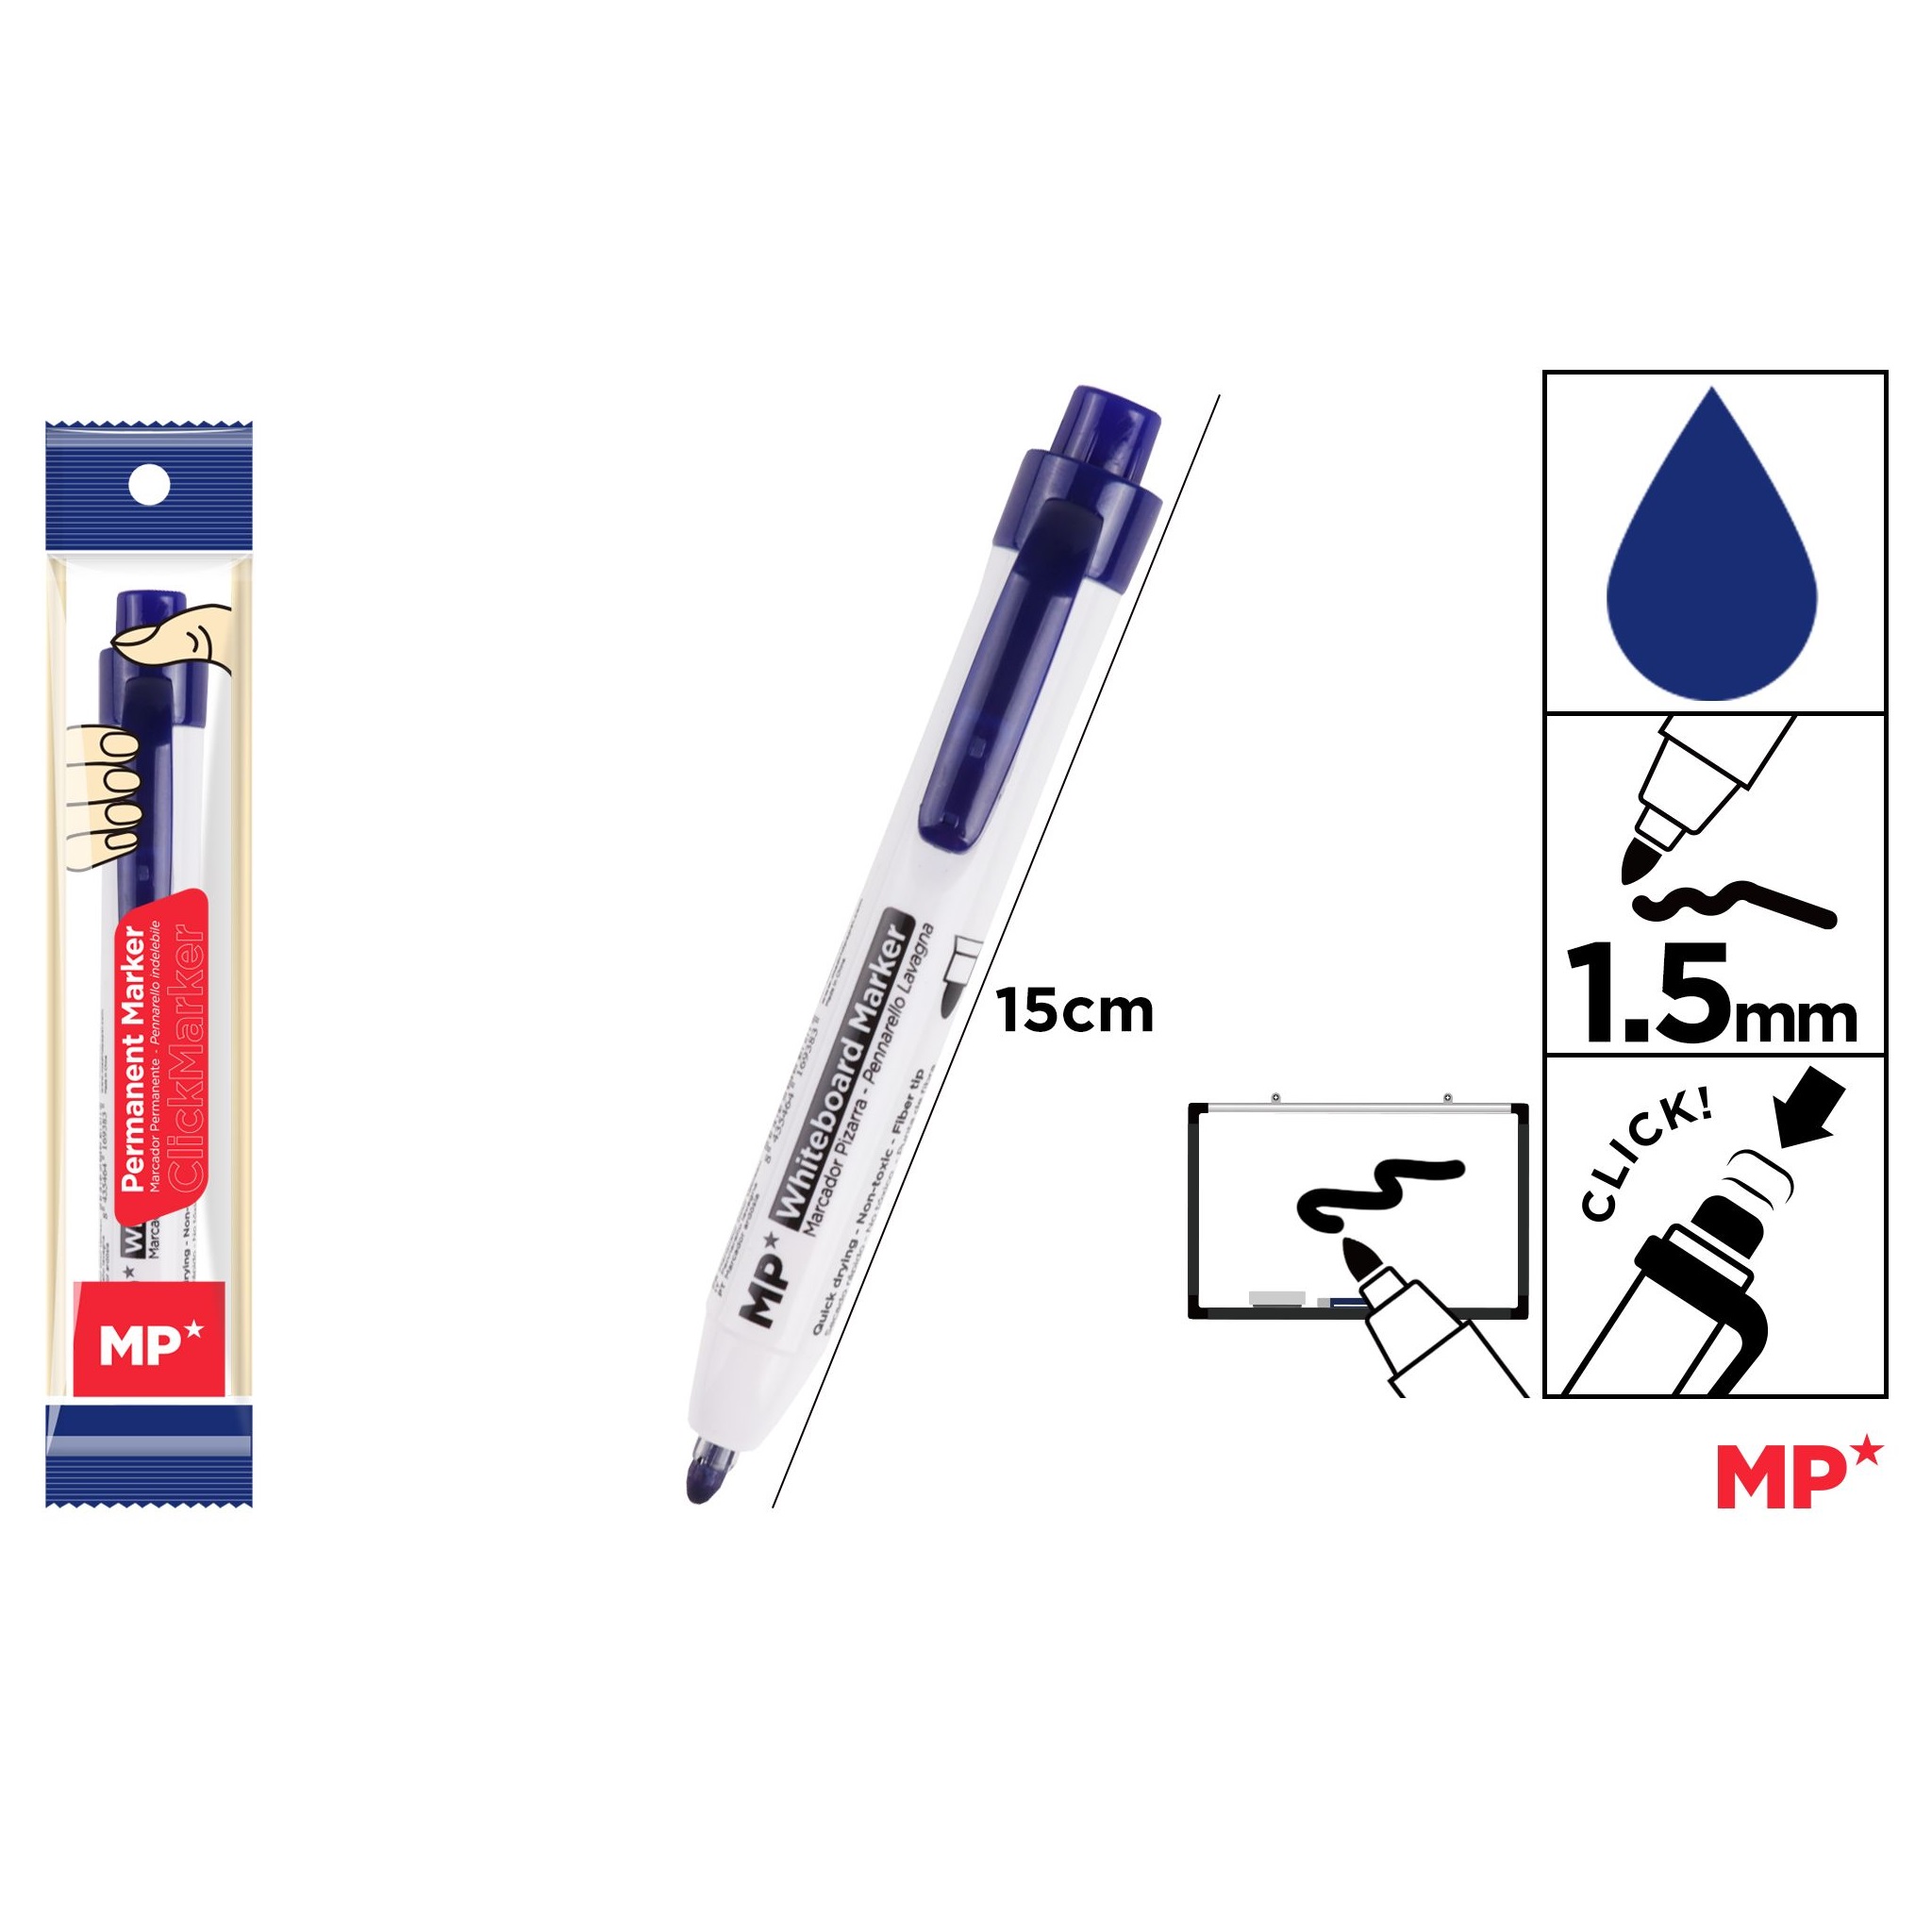 PE540 Whiteboard Marker Bullet Tip Pen Retractable Whiteboard Marker Production and Supply